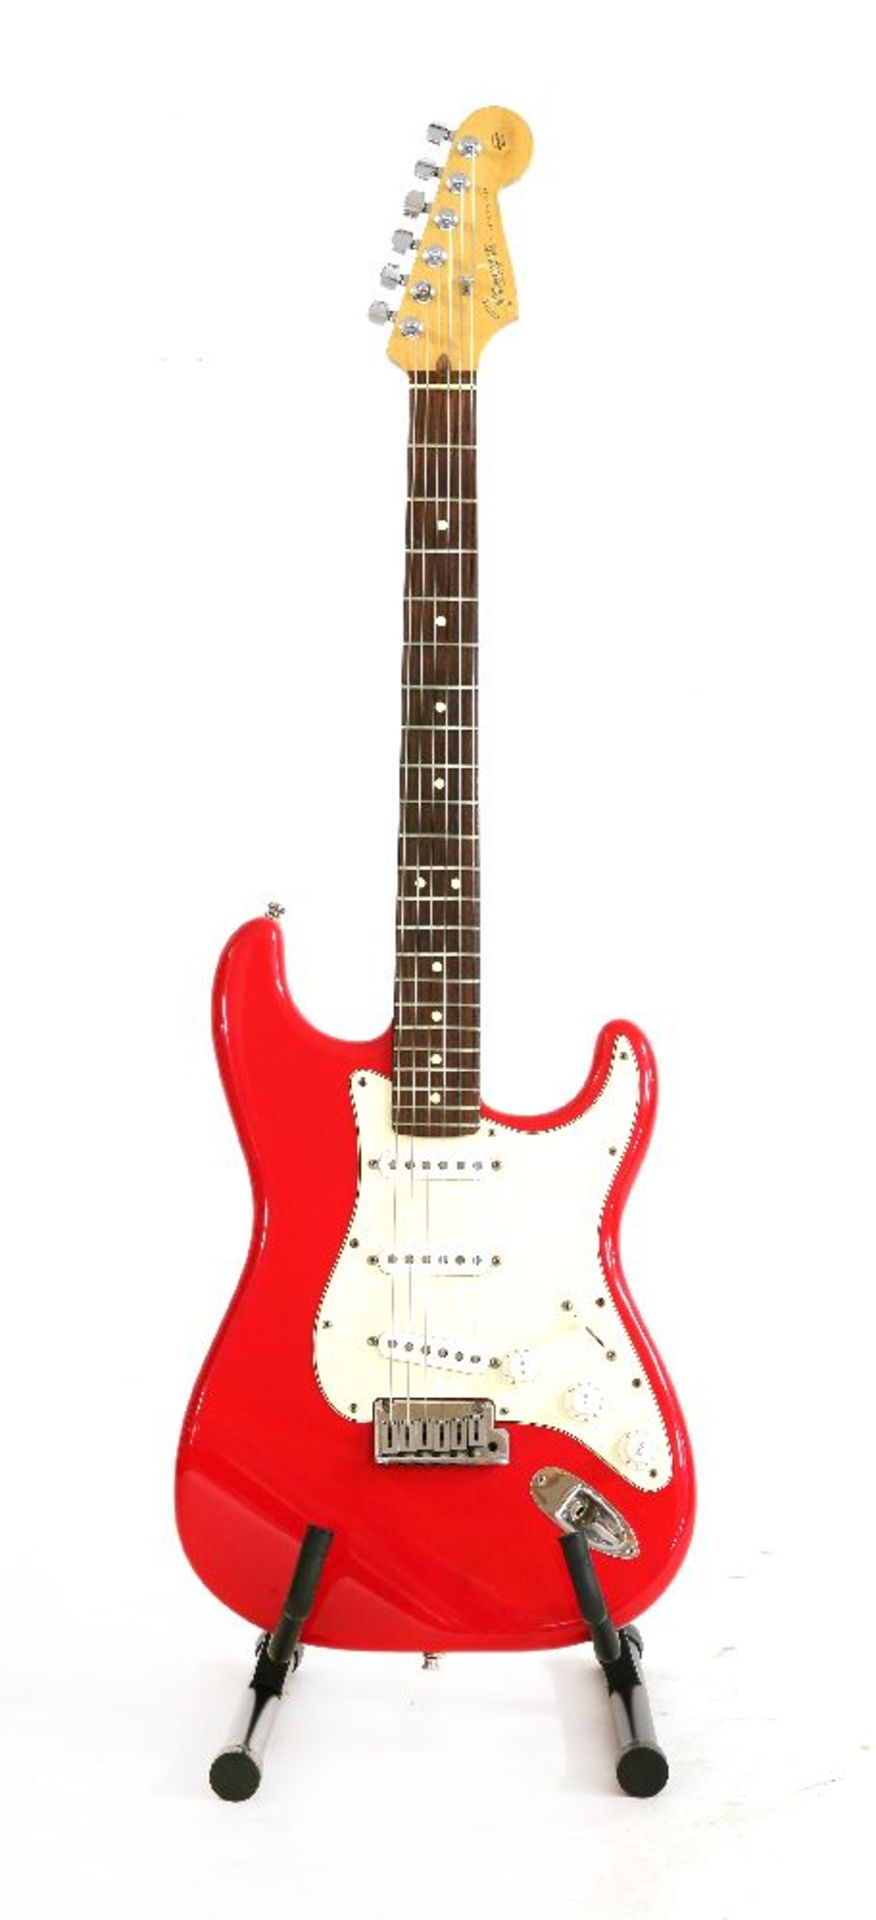 A 2000 Fender Stratocaster electric guitar,made in the USA, serial no. Z01xxxx4, complete with a